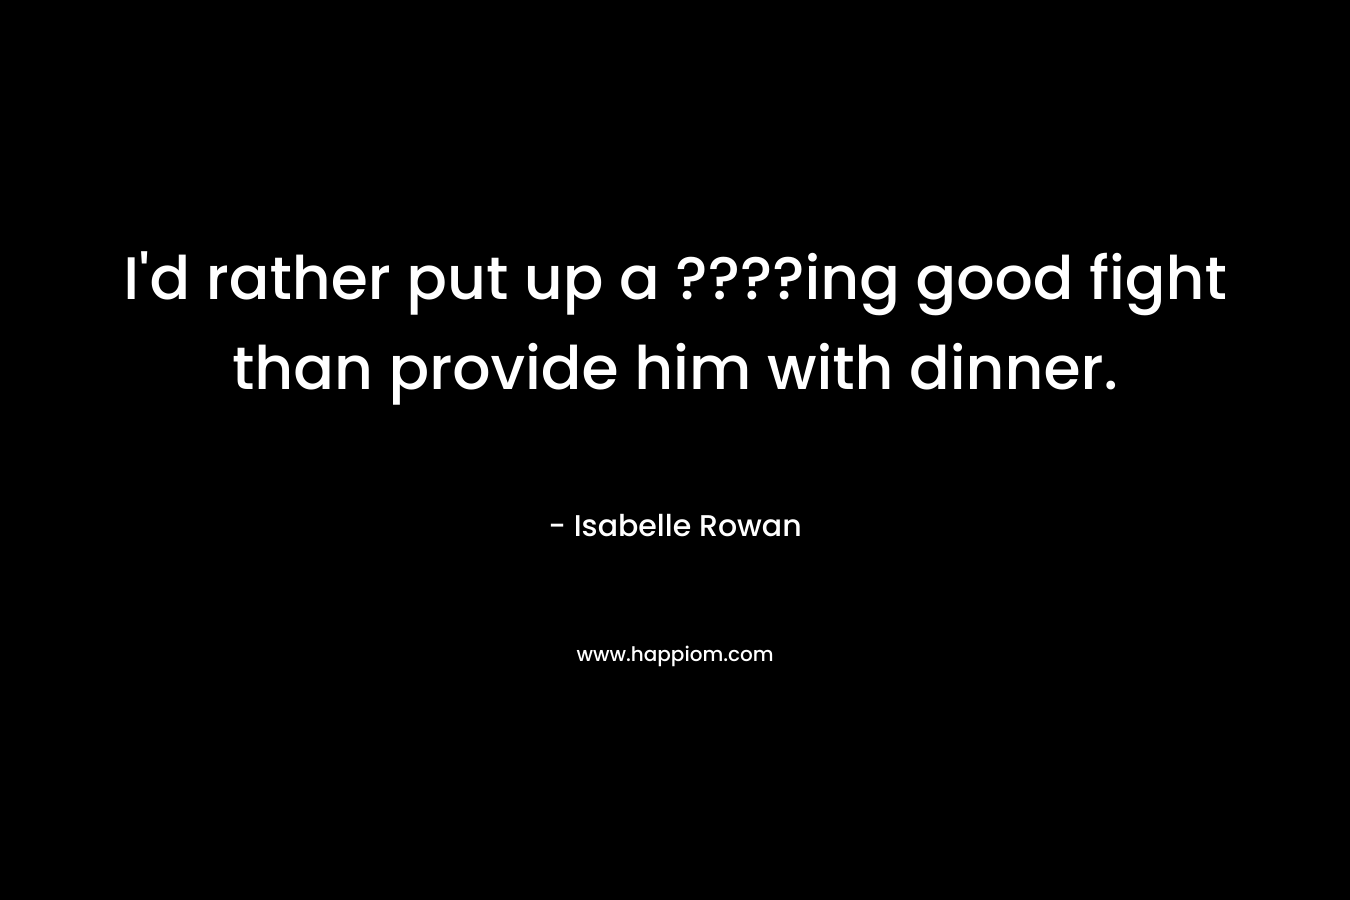 I’d rather put up a ????ing good fight than provide him with dinner. – Isabelle Rowan